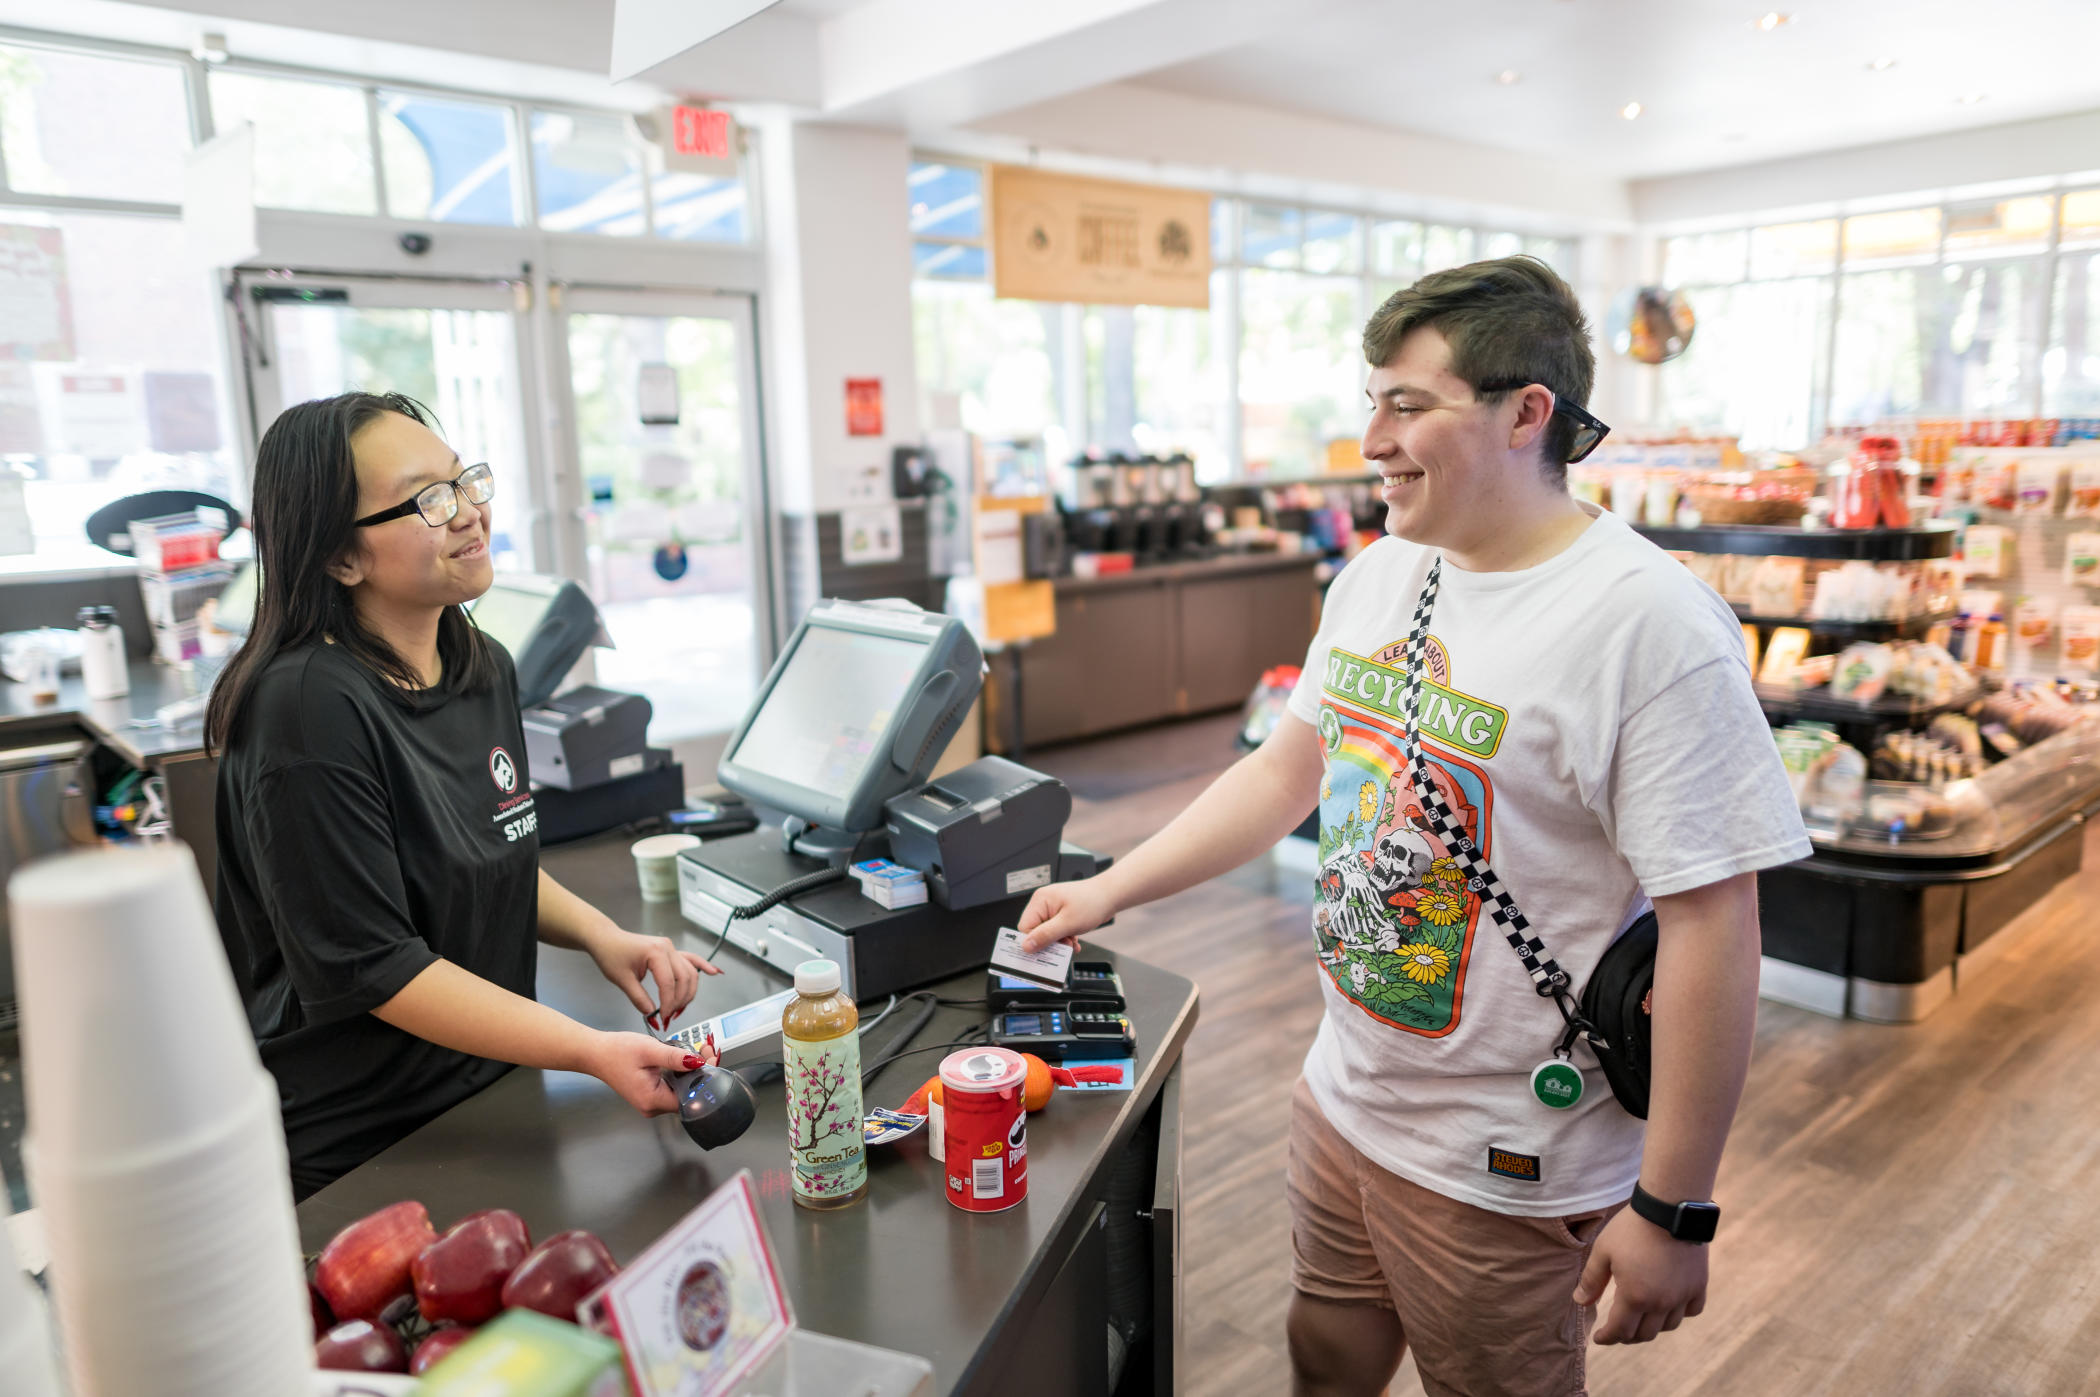 Jaylen Kruth (left) stands behind a counter as she accepts a purchase by Josh Rodriguez (right) who is using his EBT card to pay. There are a variety of snacks on the counter.